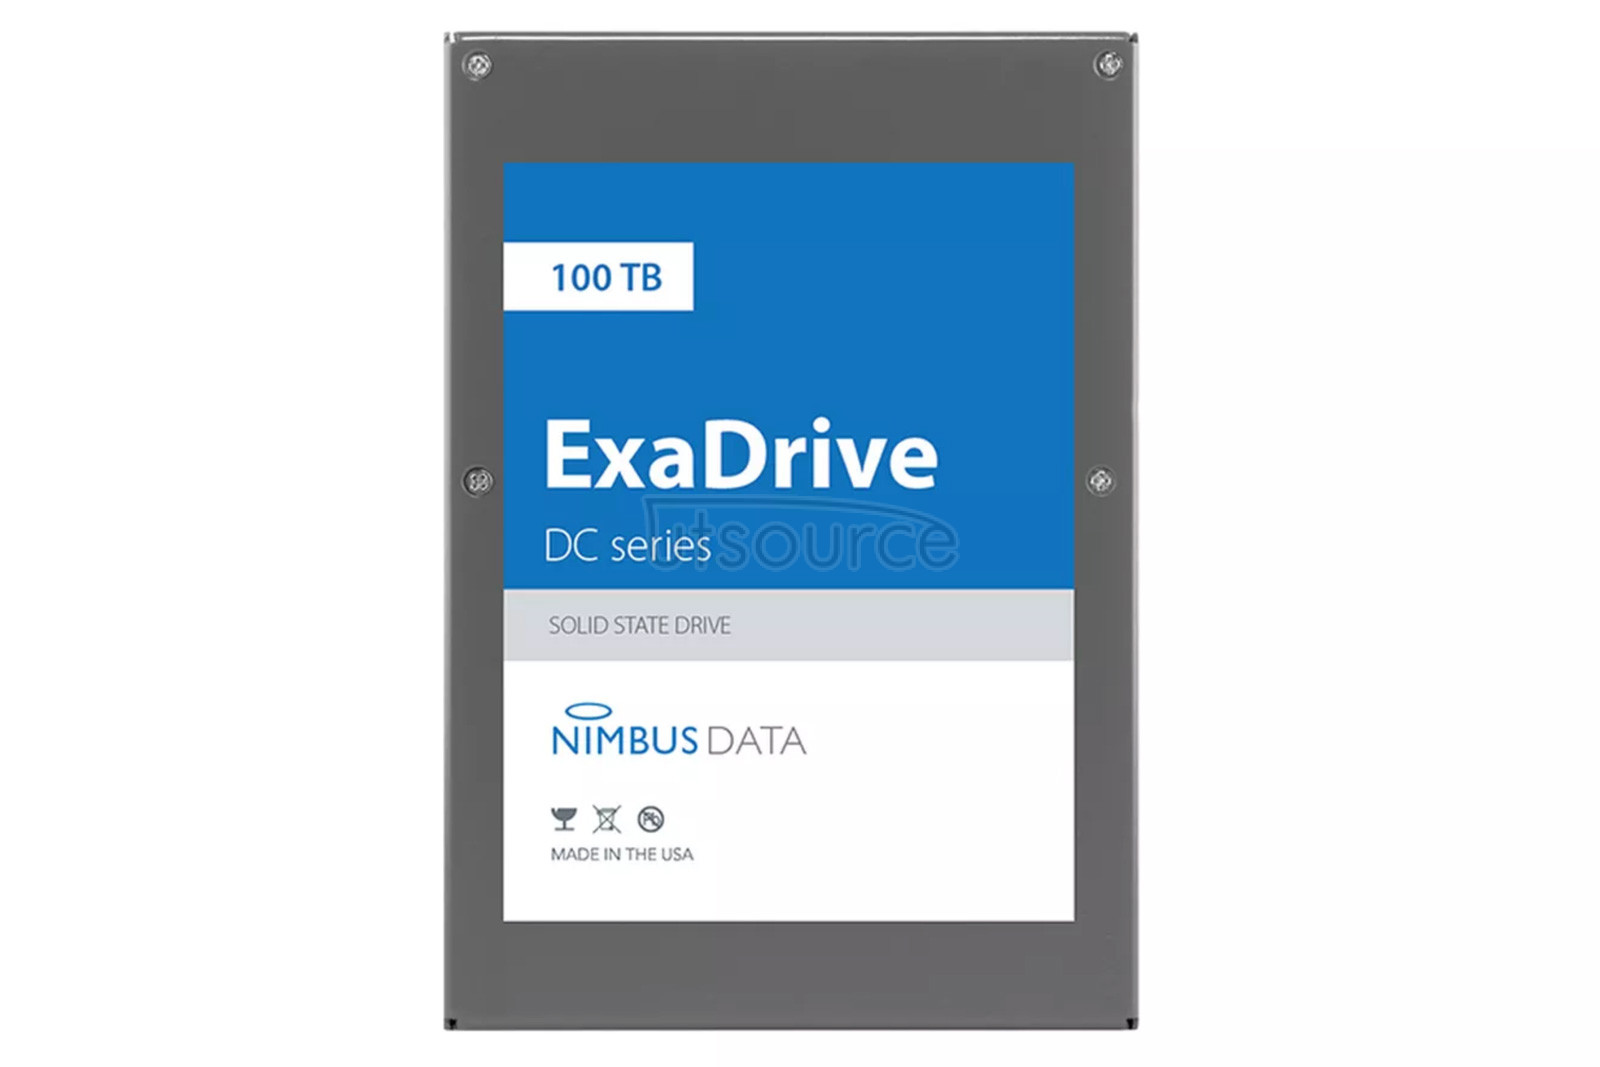 World's largest SSD capacity now stands at 100TB